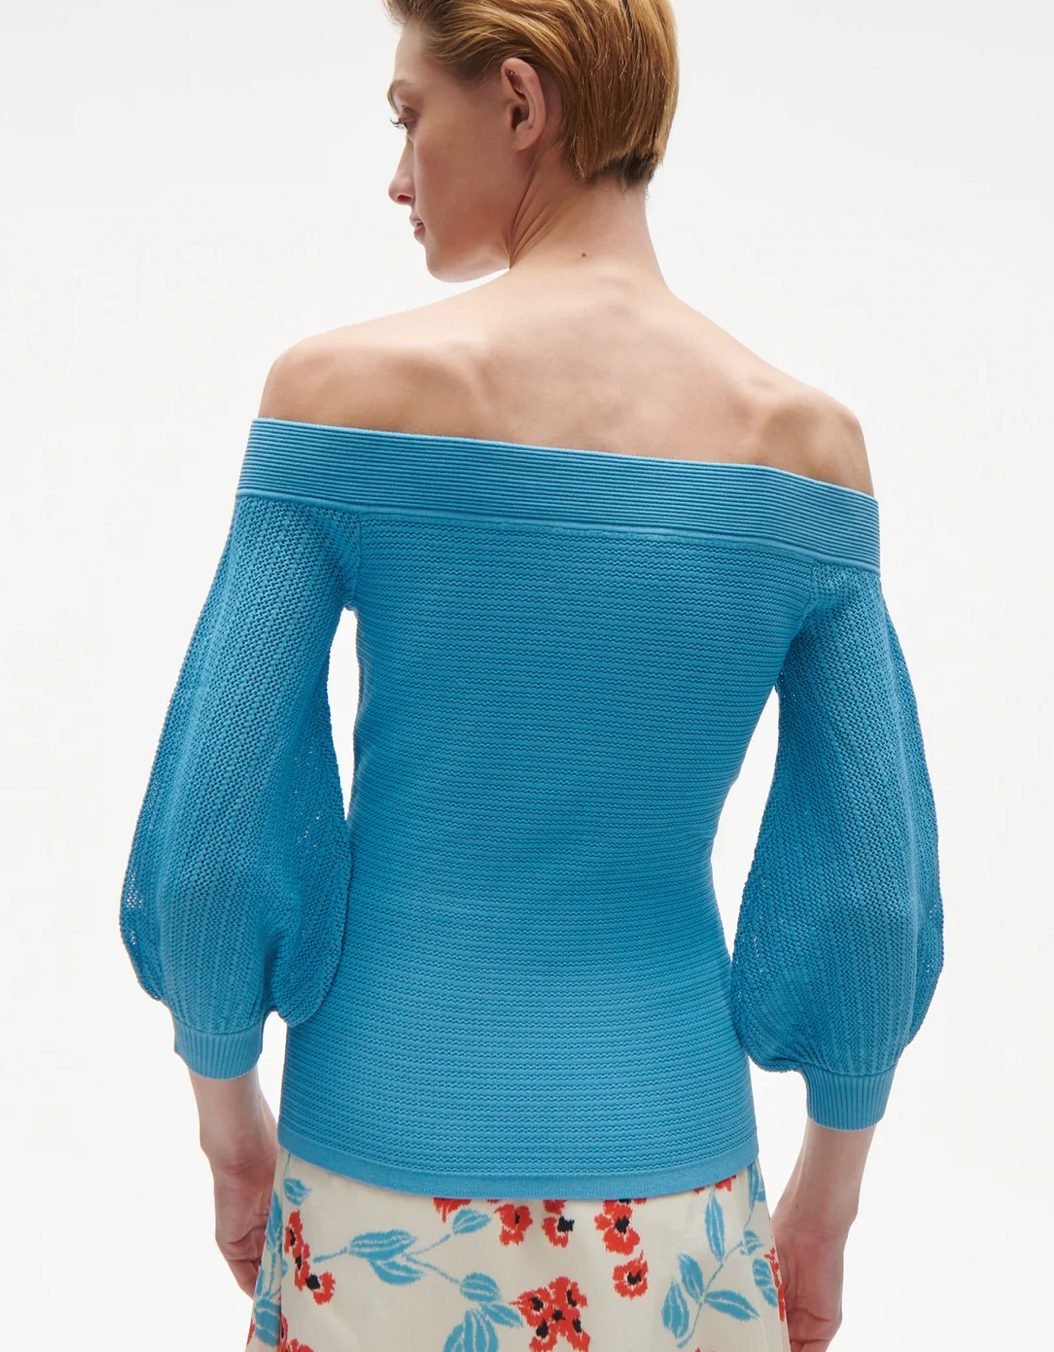 Gloria Sweater by Figue